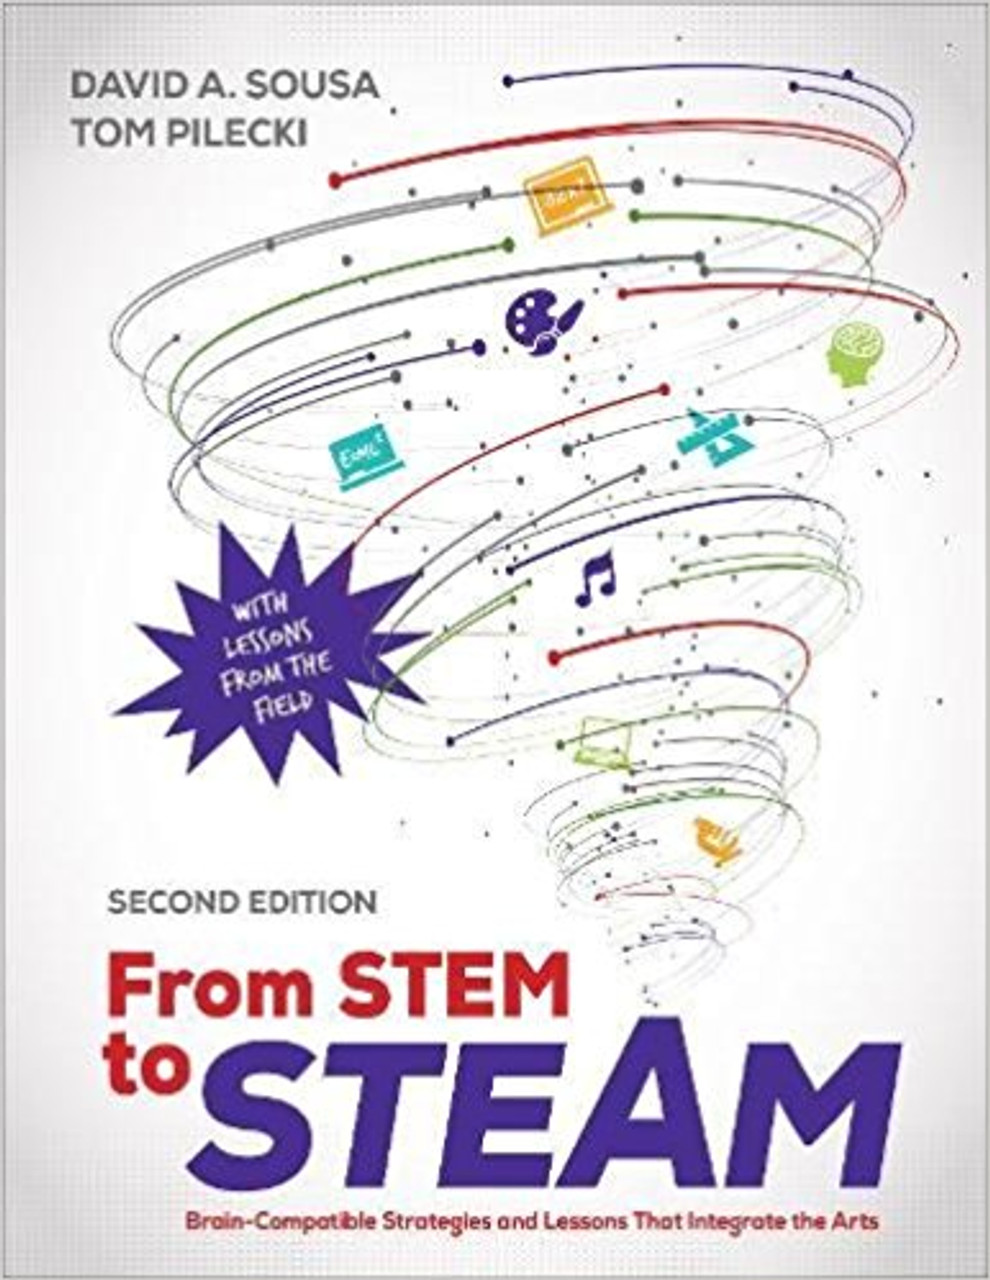 From STEM to STEAM: Using Brain-Compatible Strategies to Integrate the Arts by David A Sousa (Second Edition)